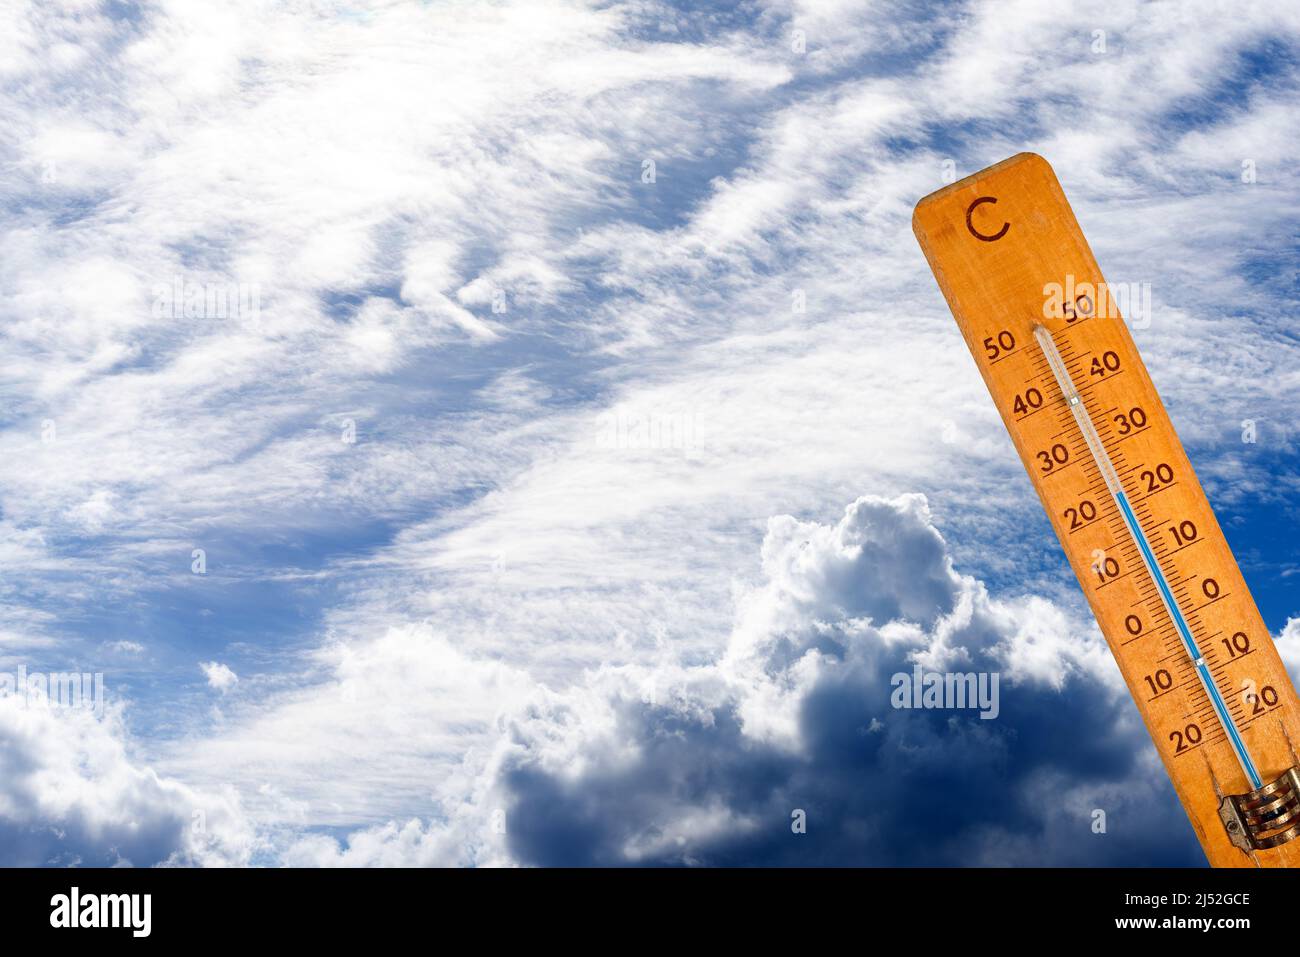 Thermometer against sky with clouds Stock Photo